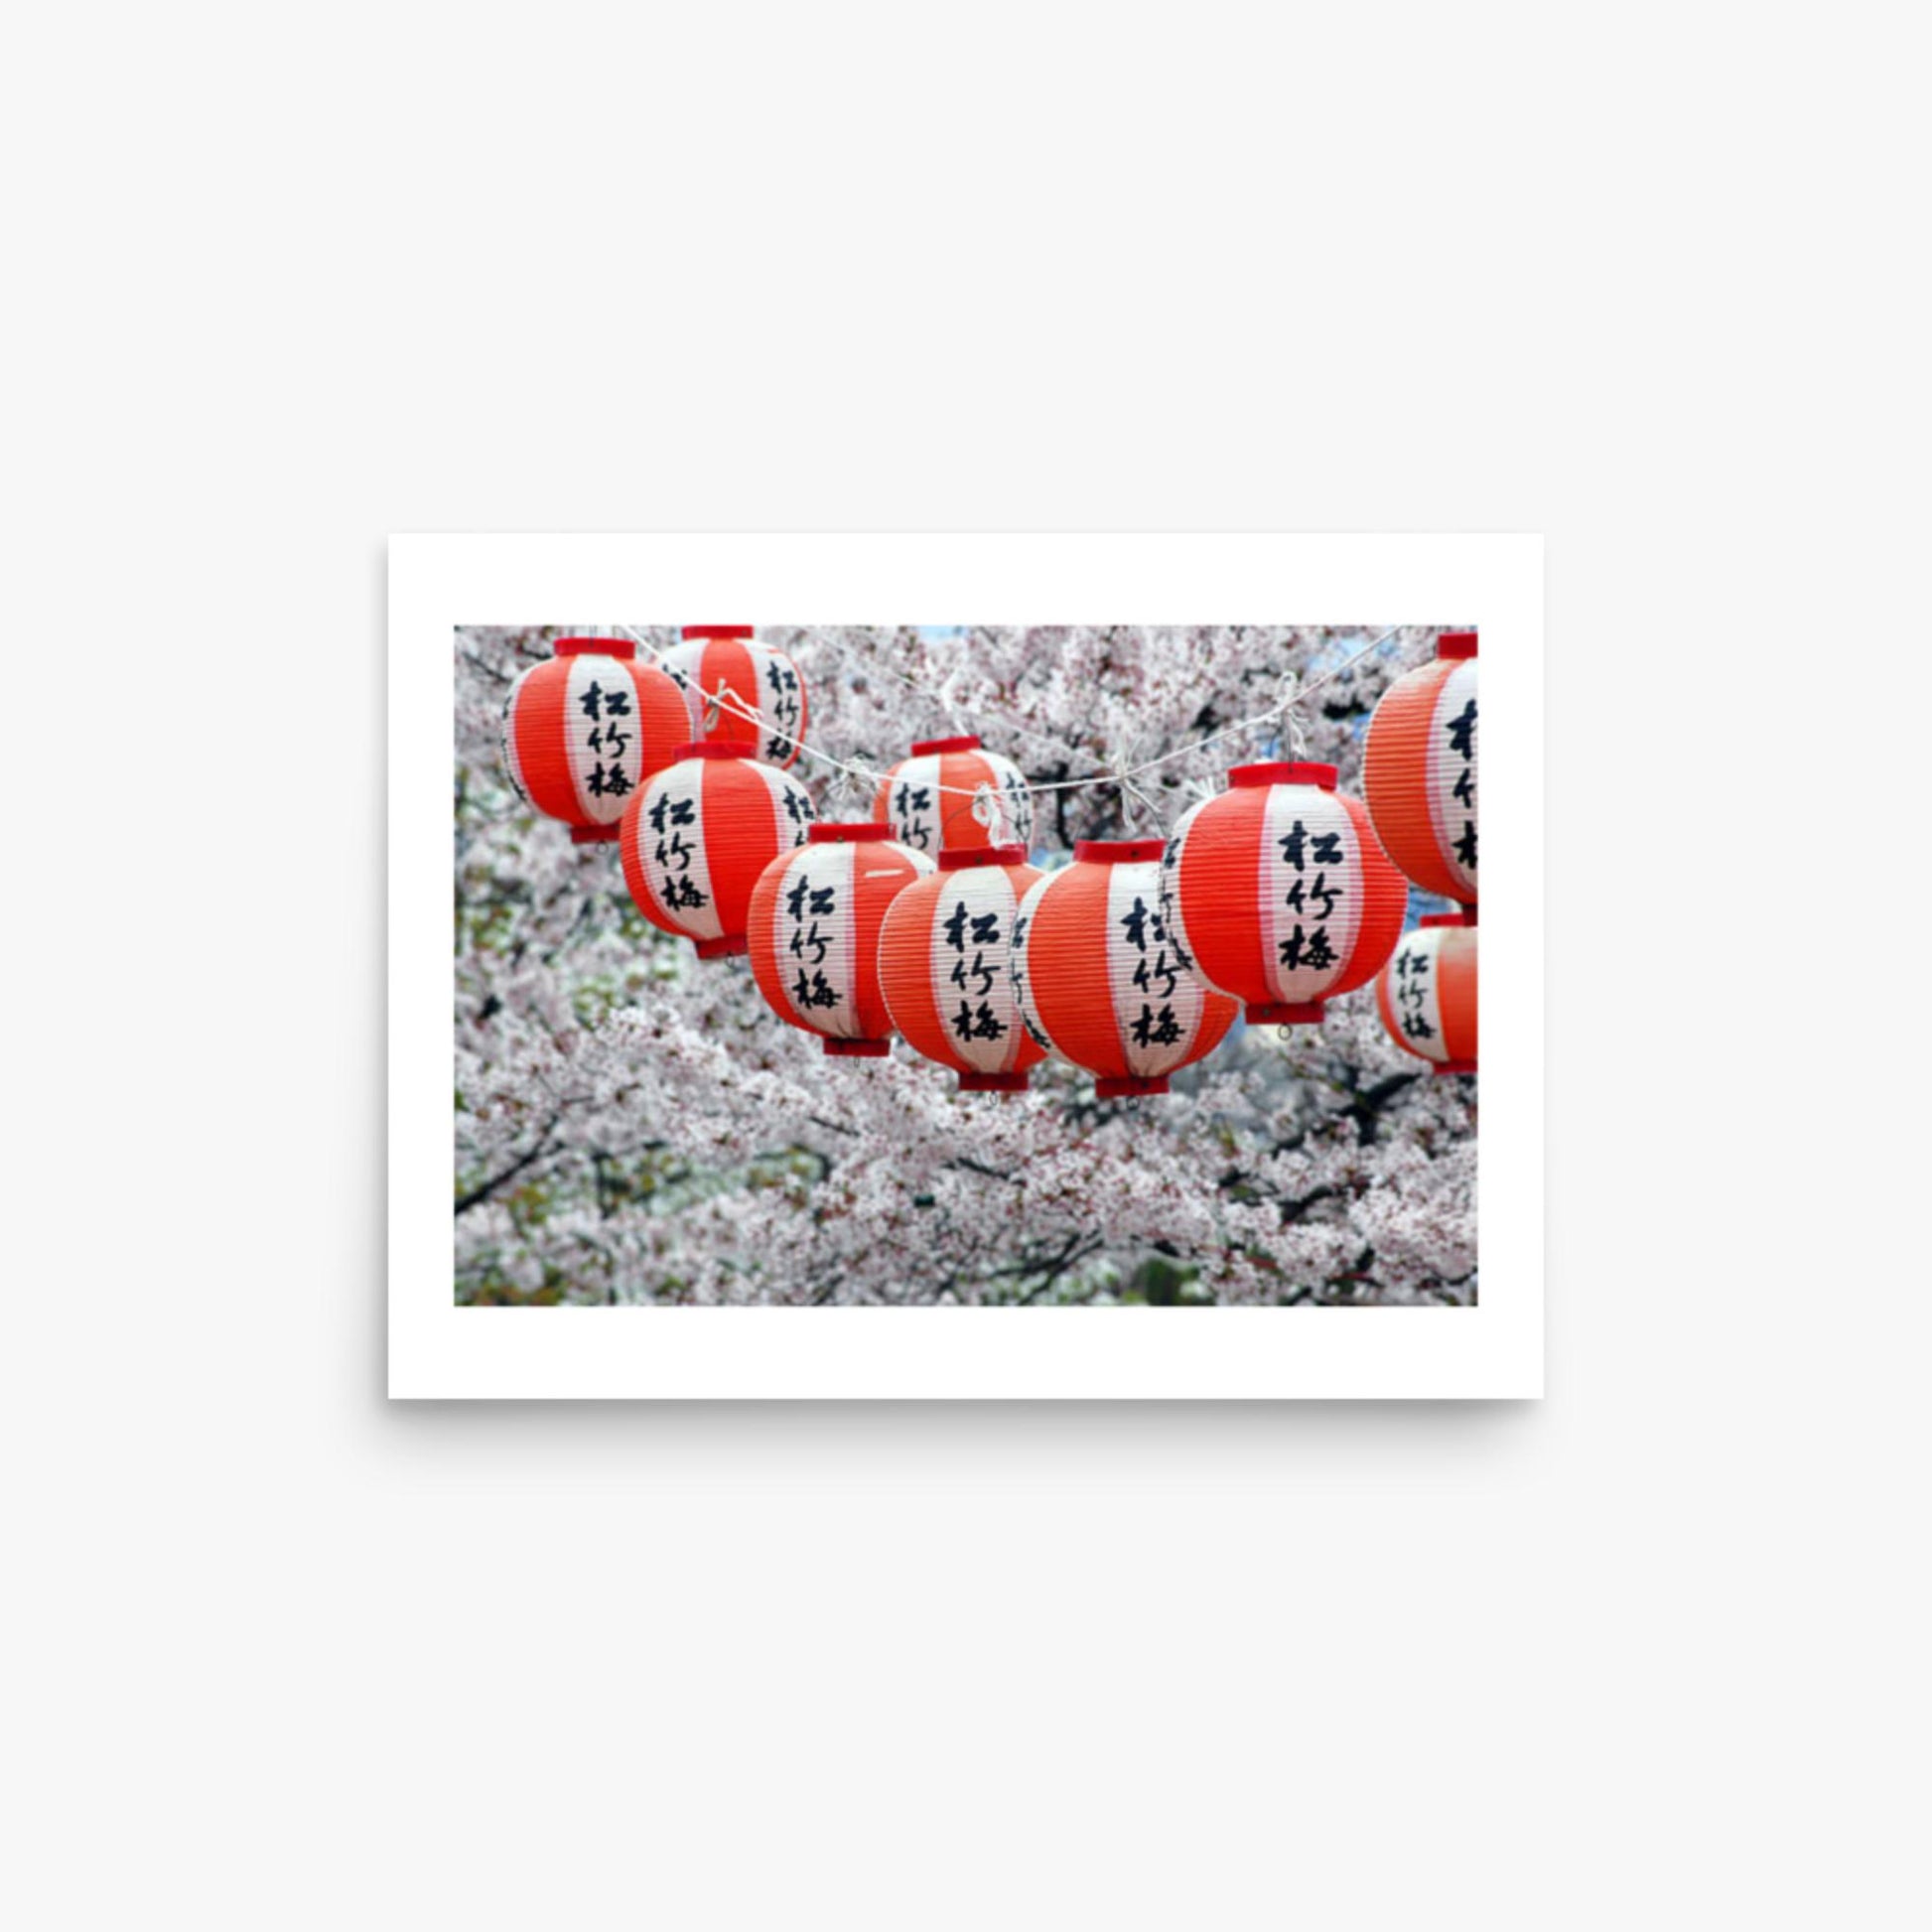 Japanese Lanterns and Cherry Blossom, Kyoto, Japan 12x16 in Poster